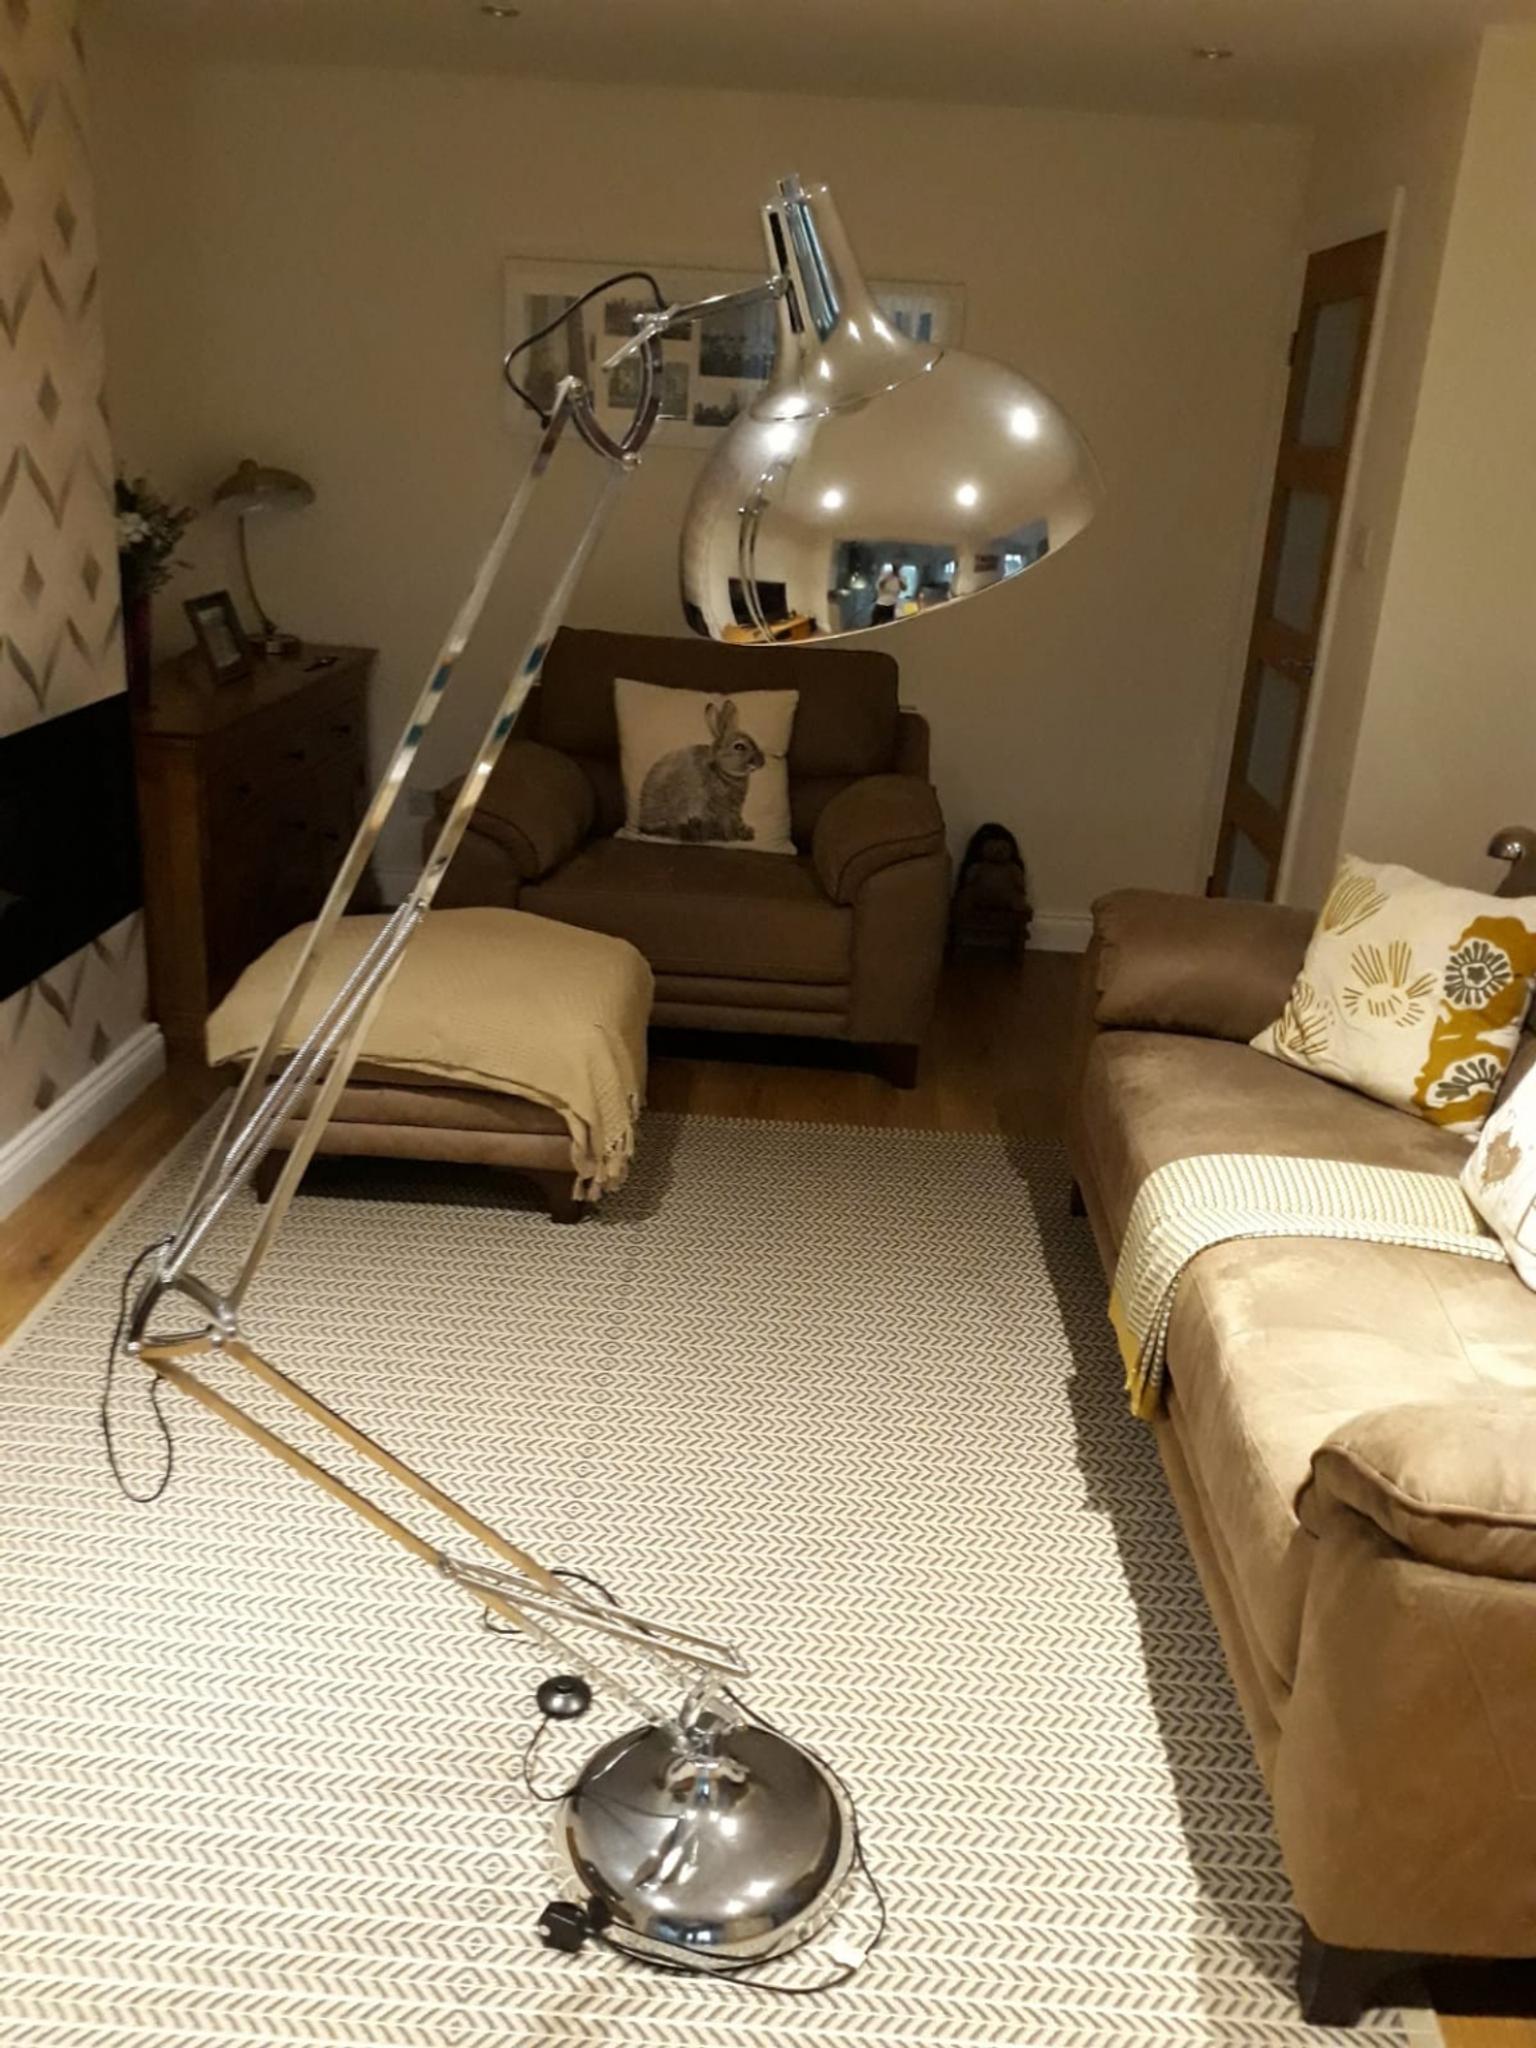 Chrome Floor Lamp In Doncaster For 35 00 For Sale Shpock